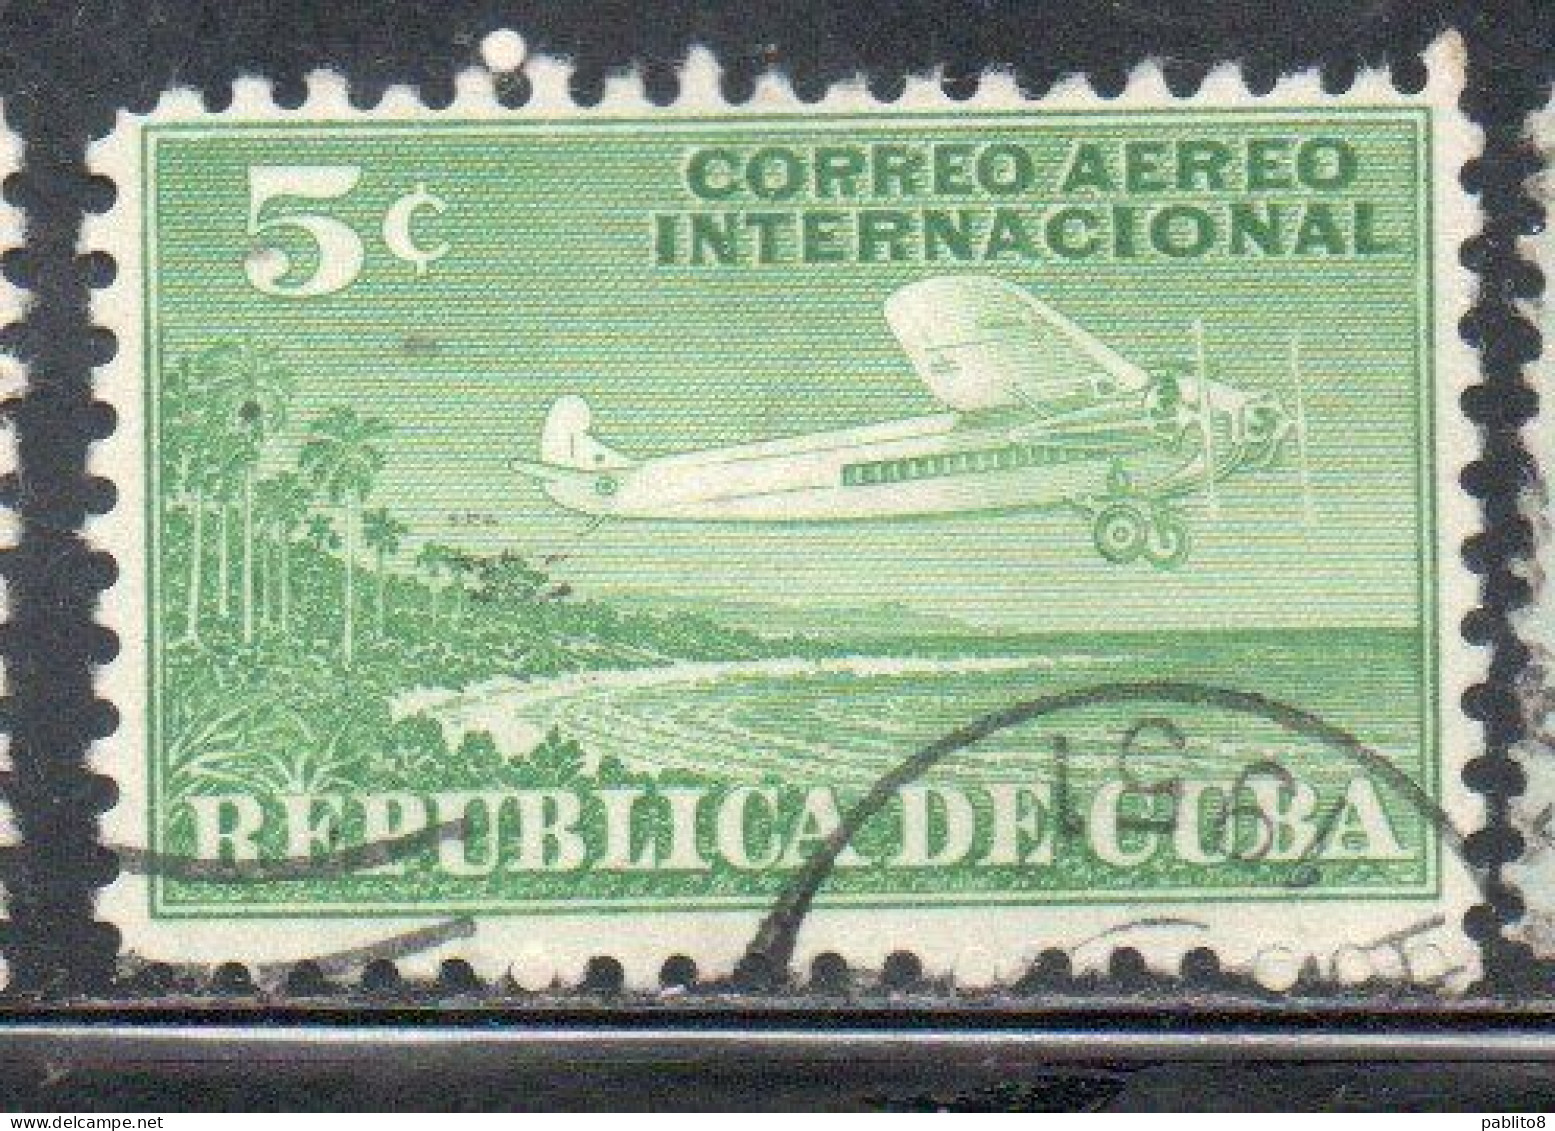 CUBA 1931 AIRMAIL AIR POST MAIL FOR FOREIGN POSTAGE PLANE AND COAST 5c USADO USED USATO OBLITERE' - Poste Aérienne